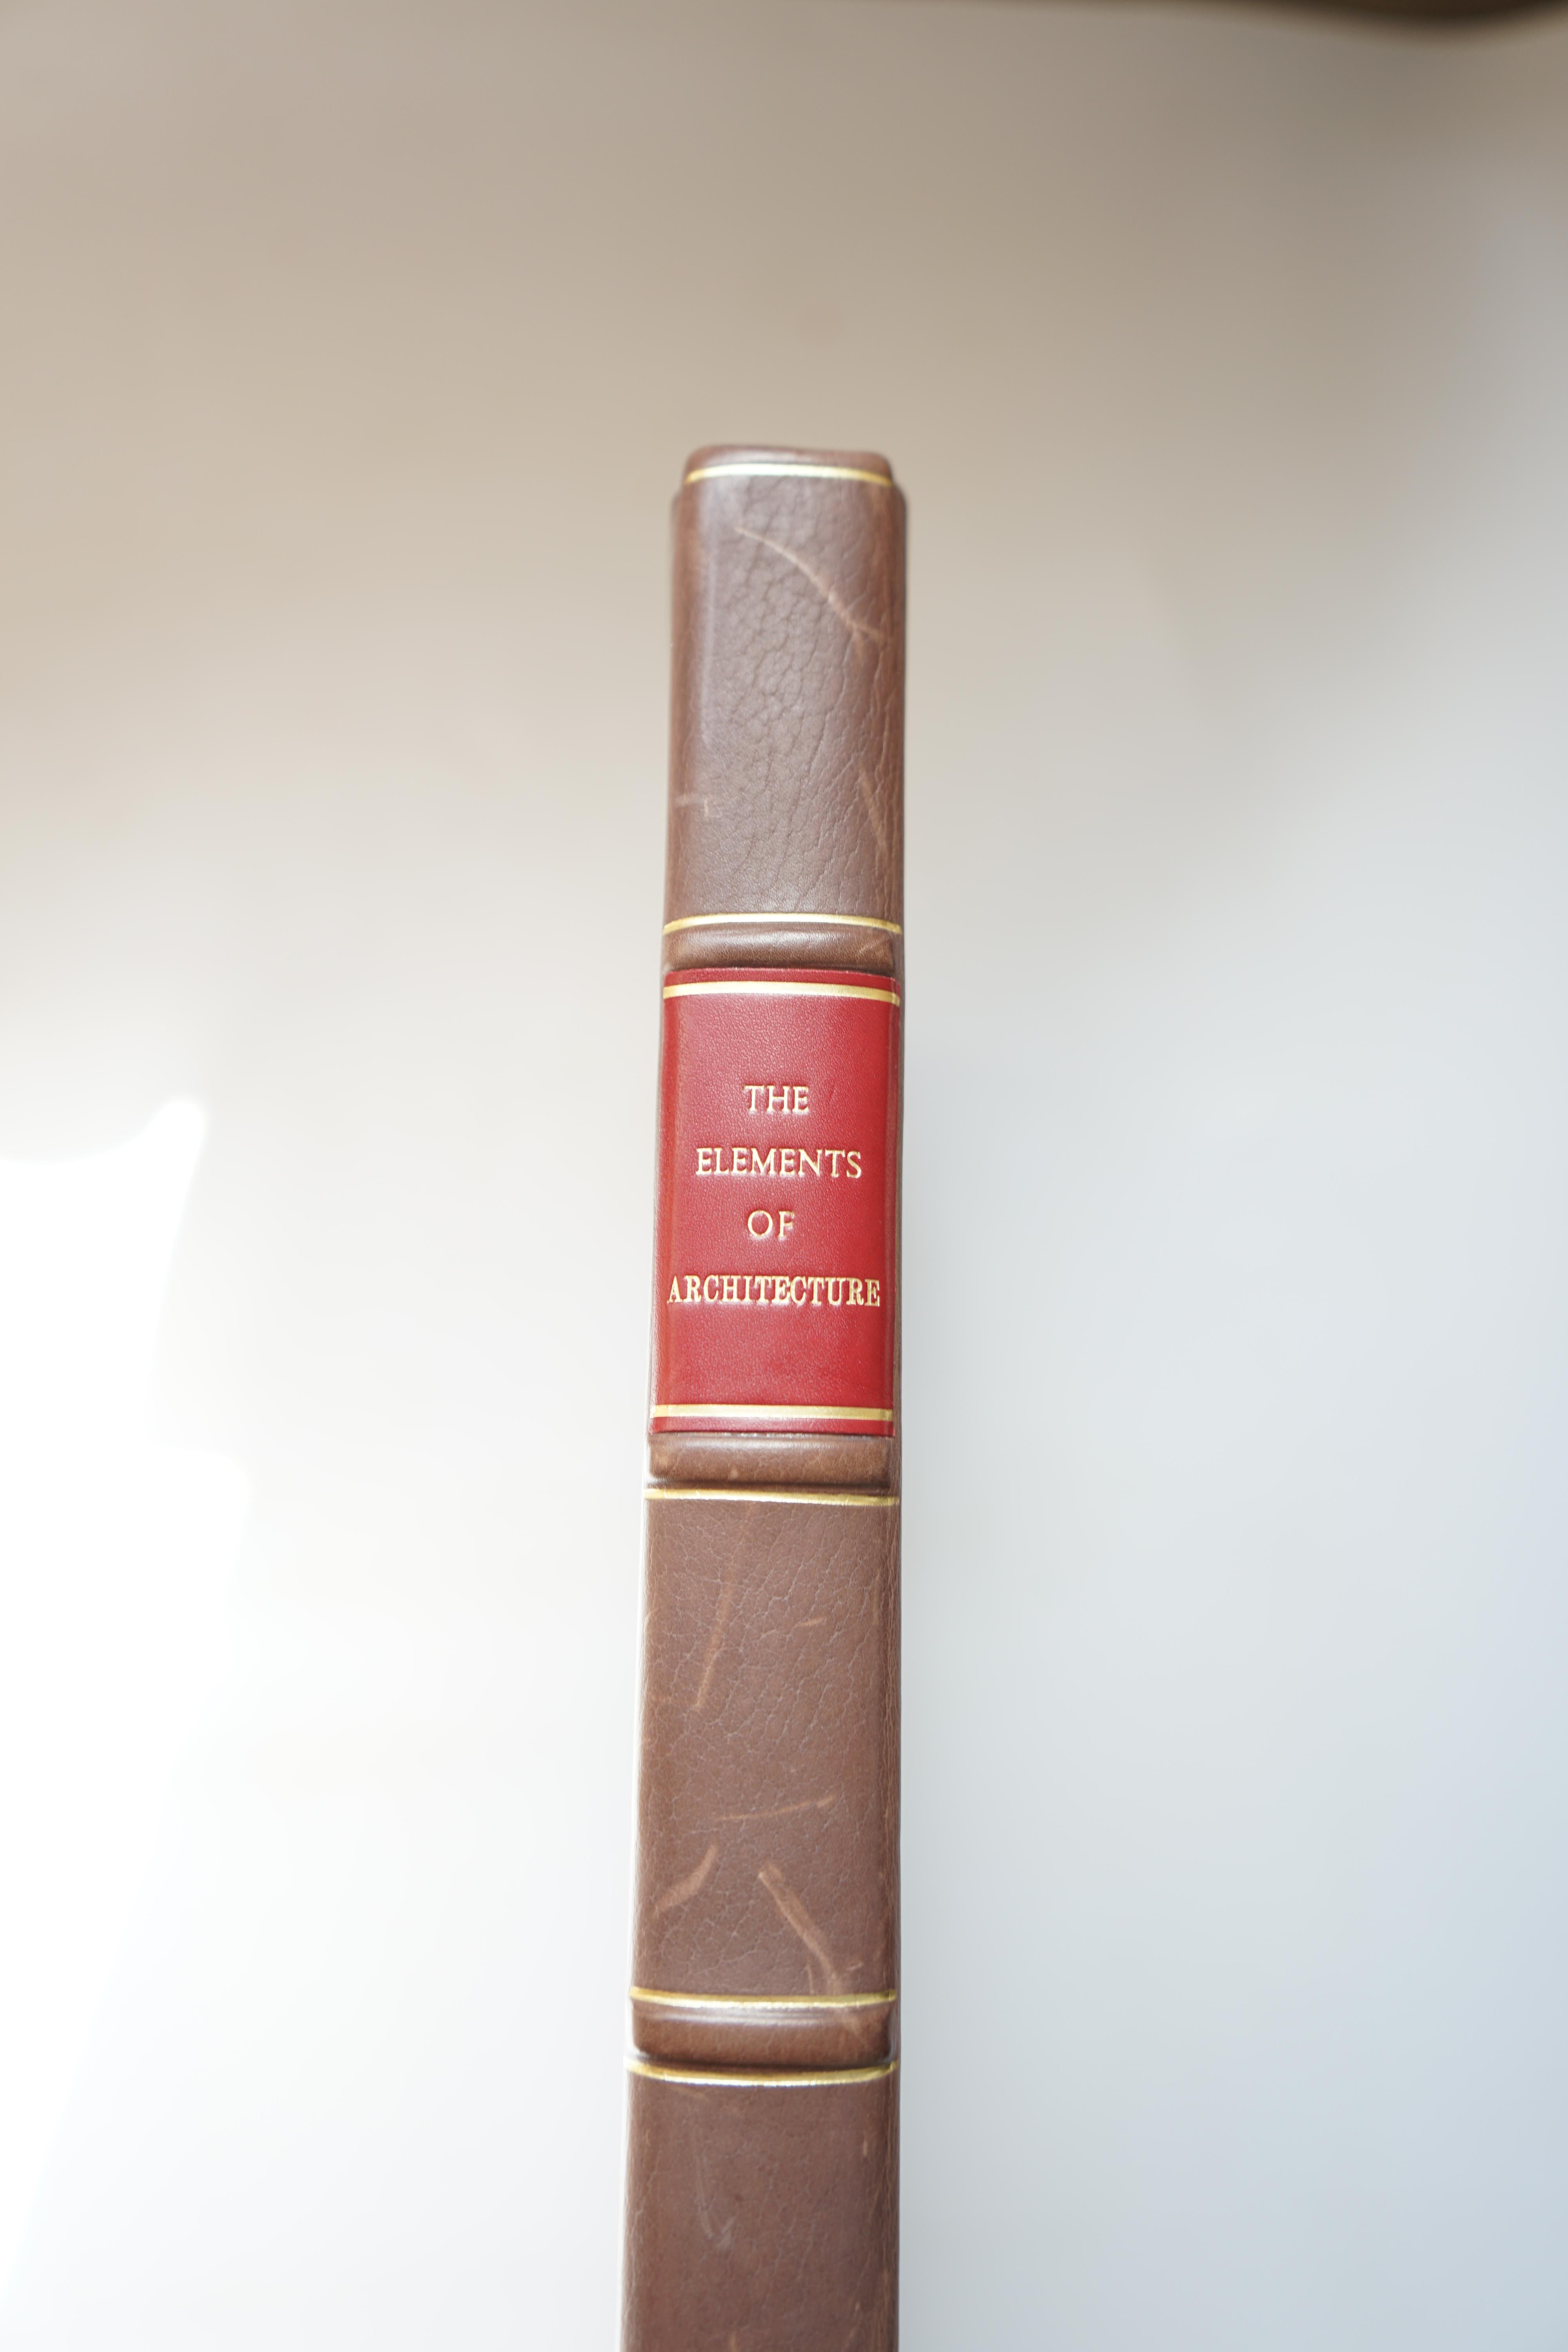 Freart de Chambray, Roland - A Parallel of the Ancient Architecture with the Modern, translated by John Evelyn, with the edition of the Elements of Architecture collected by Sir Henry Wotton, folio, rebound quarter moroc